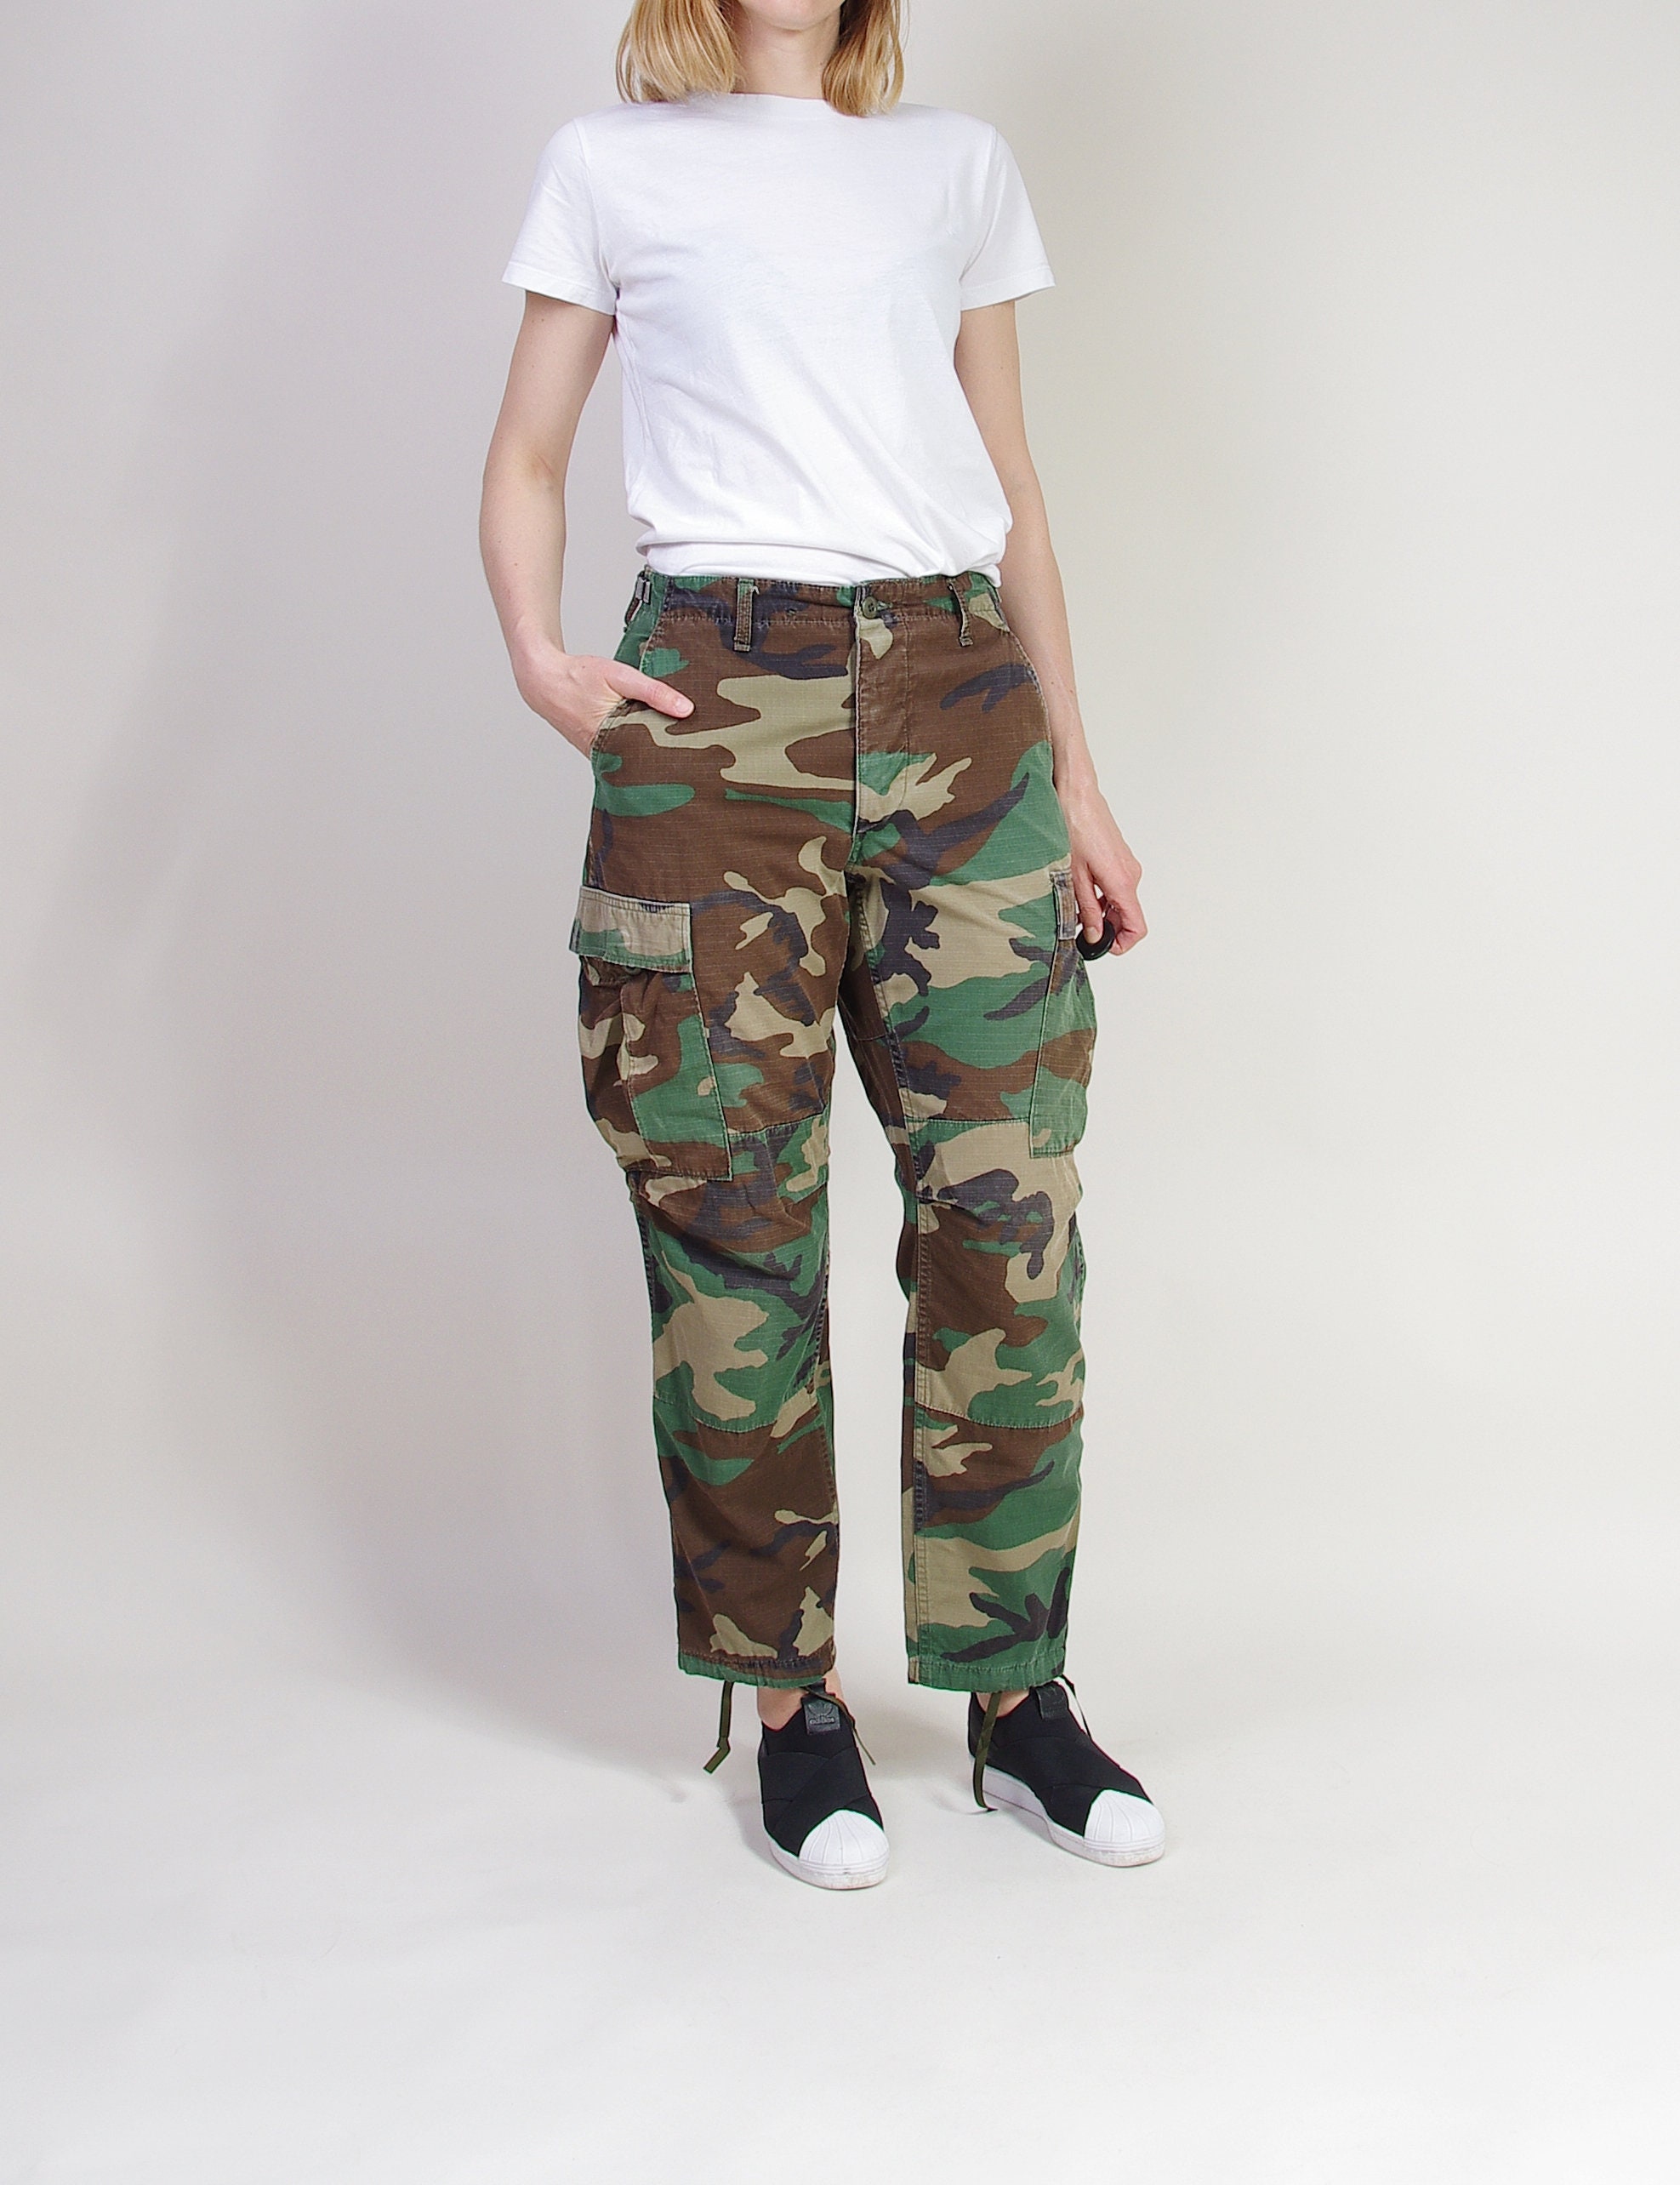 1980s Woodland Army Cargo Pants US Camouflage Military - Etsy